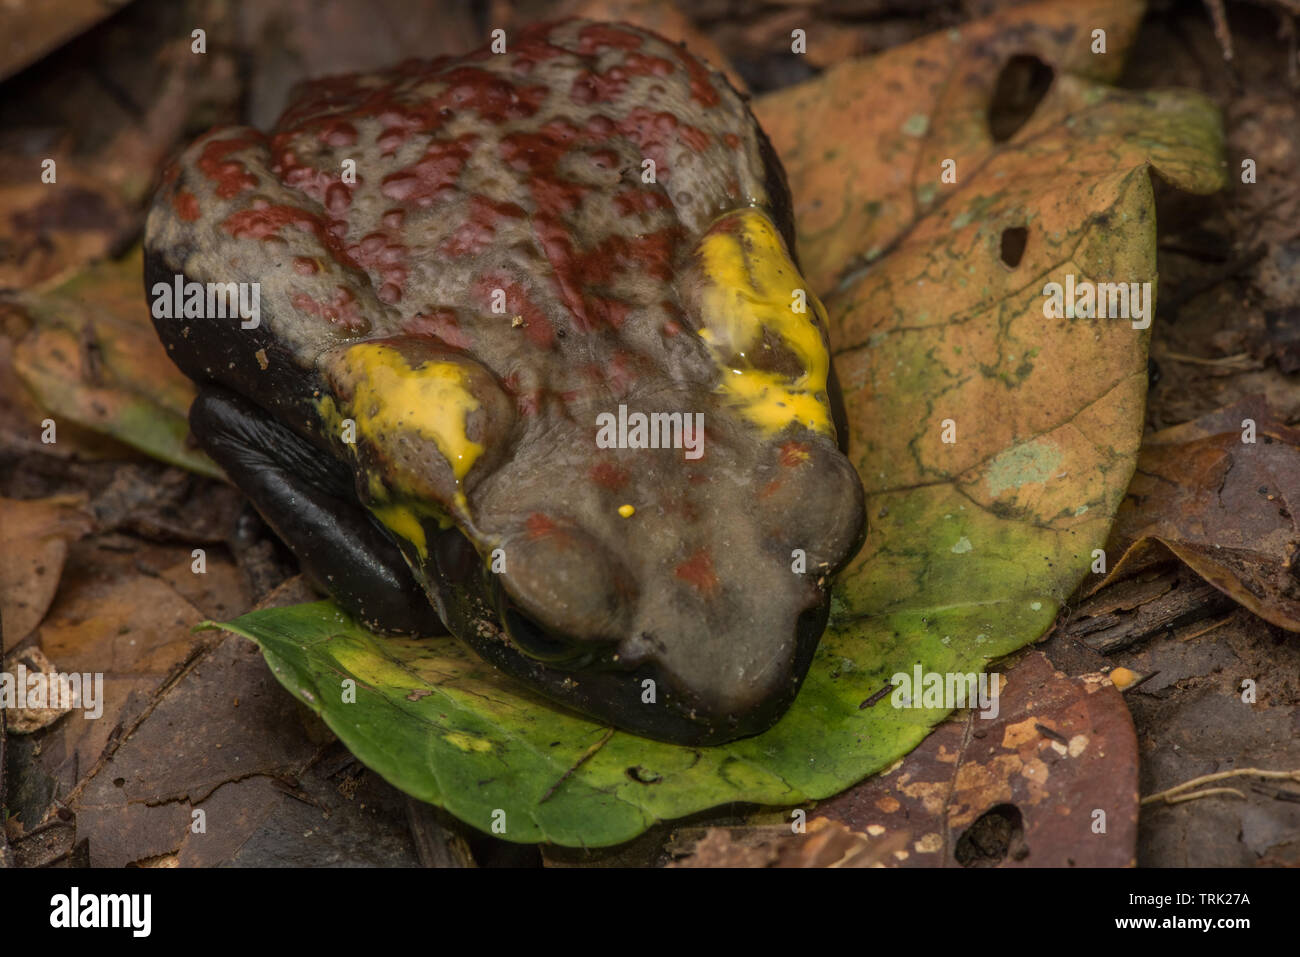 Smooth-sided toad (Rhaebo guttatus) releasing a poisonous substance from its parotoid glands. A potent neurotoxin it is dangerous if ingested. Stock Photo